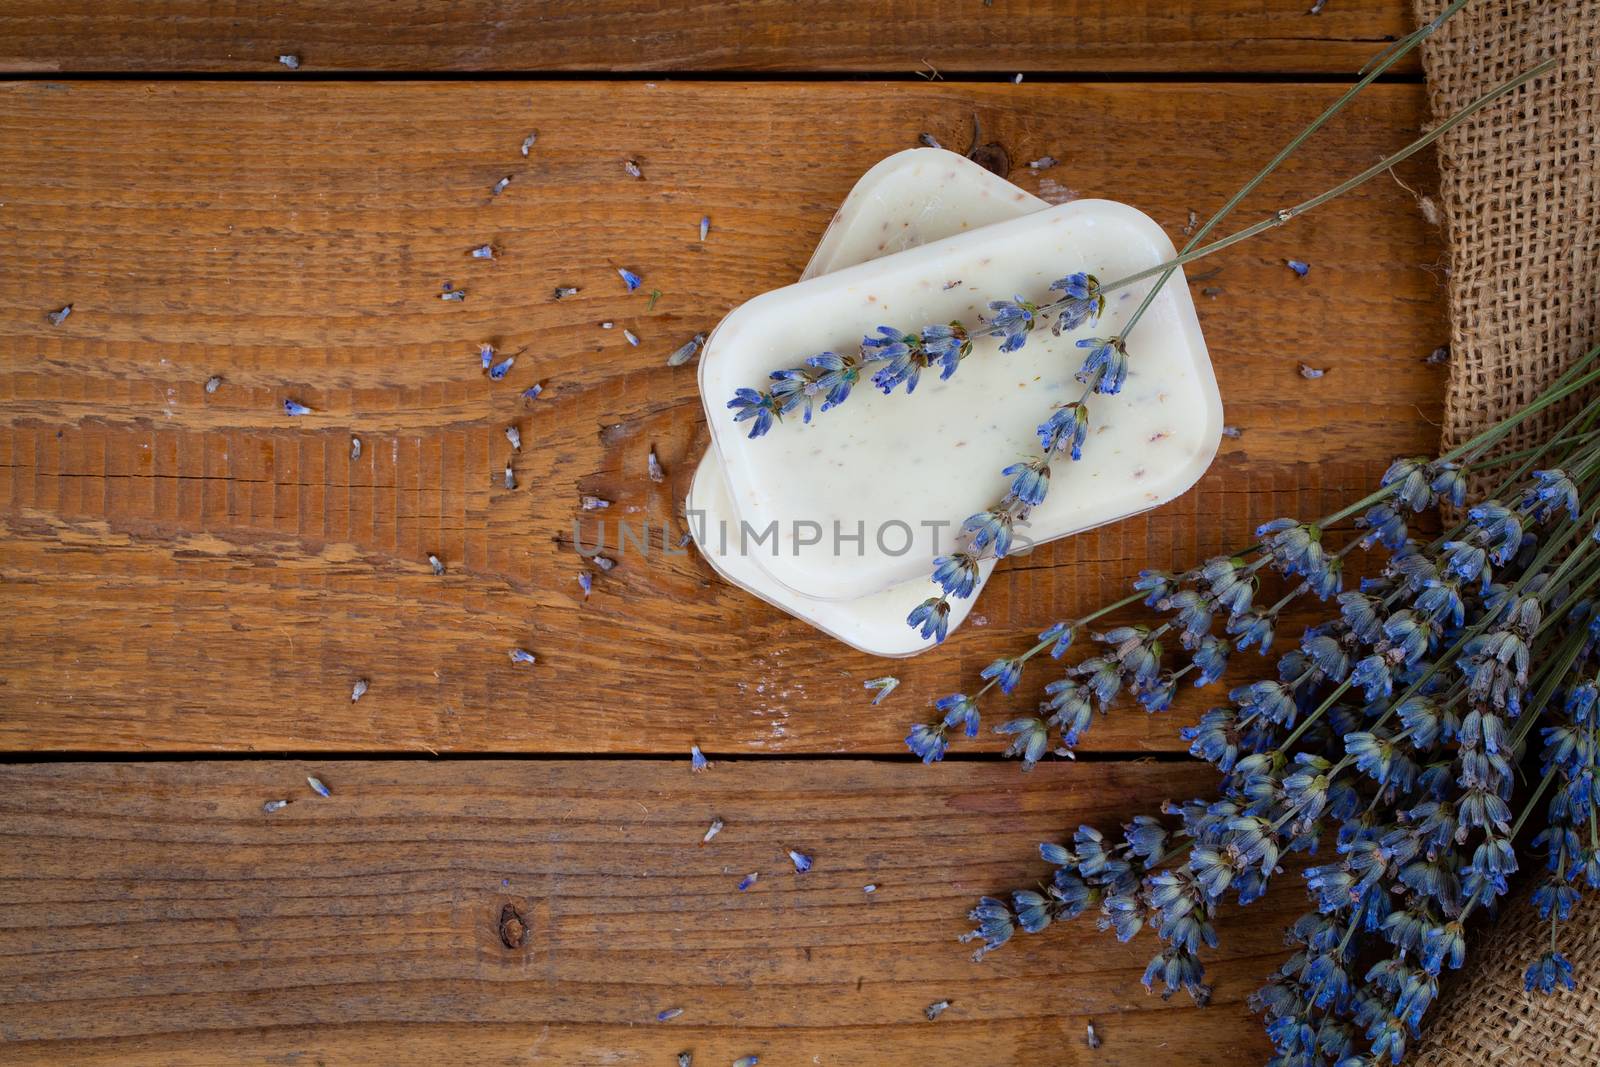 Bars of soap with lavender on a rustic wooden background